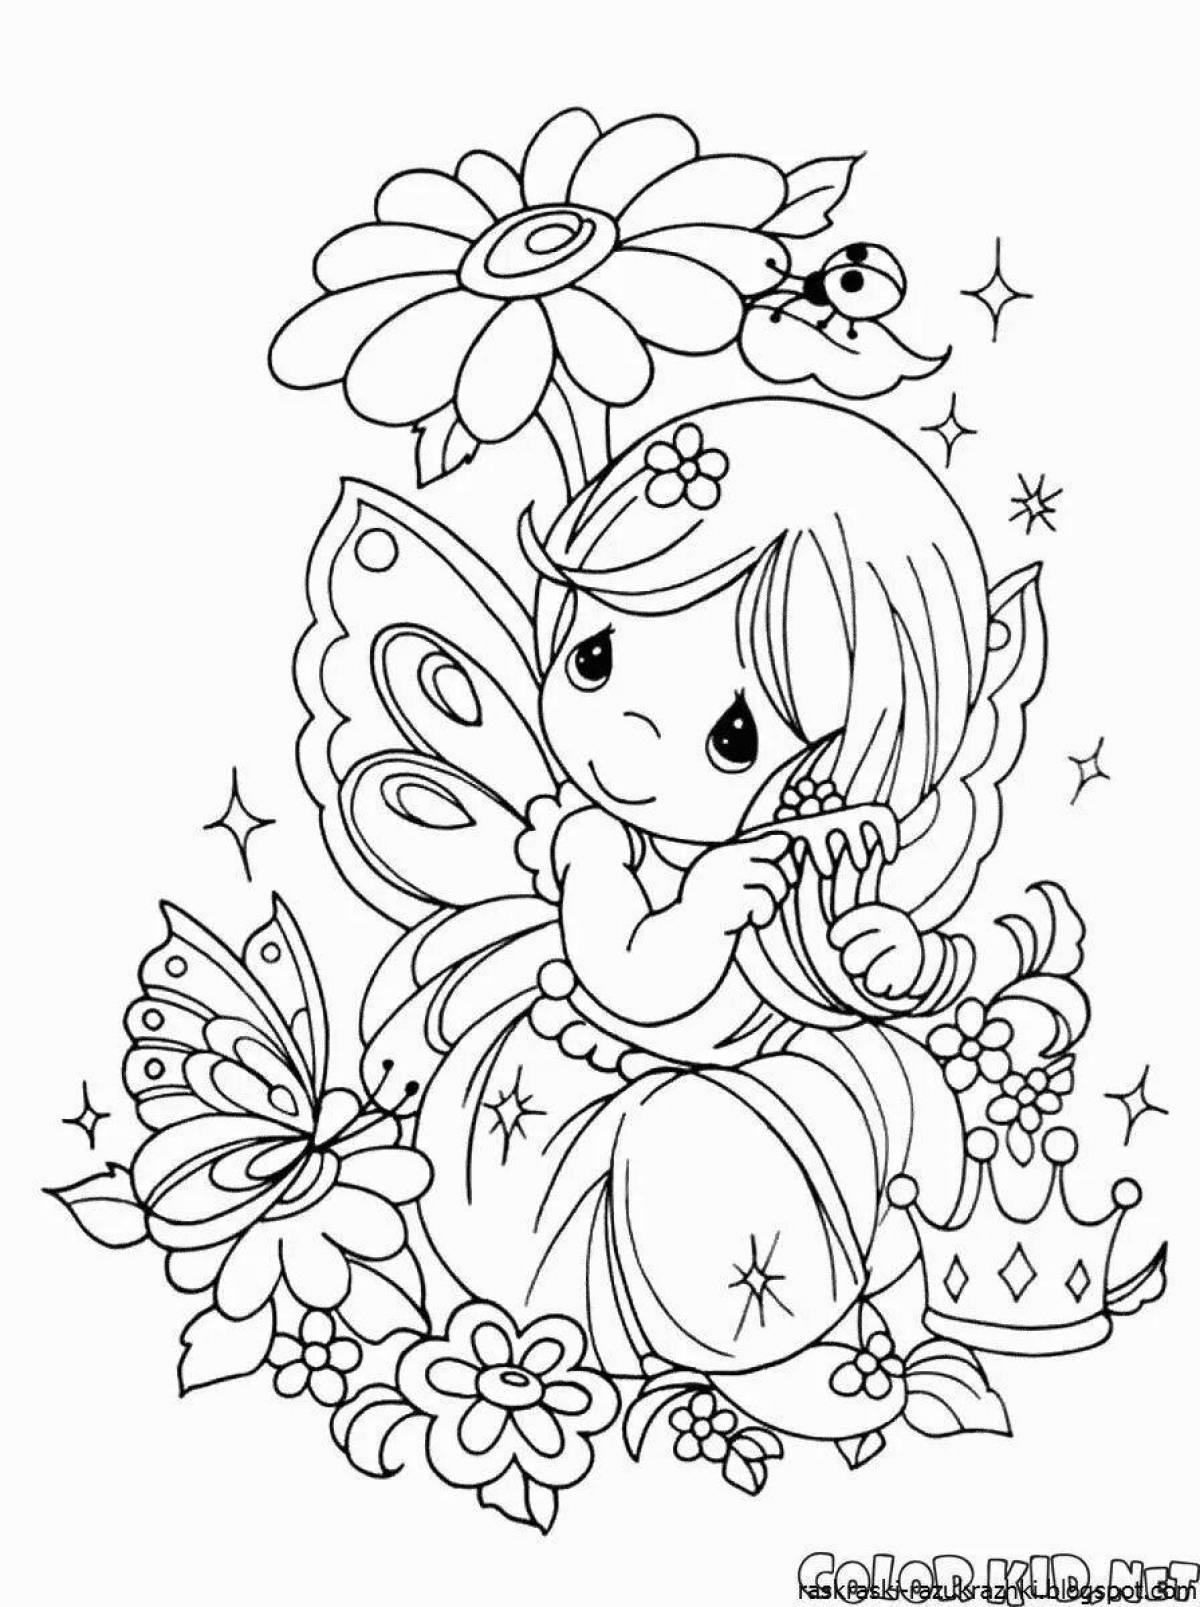 Creative coloring for girls grade 2